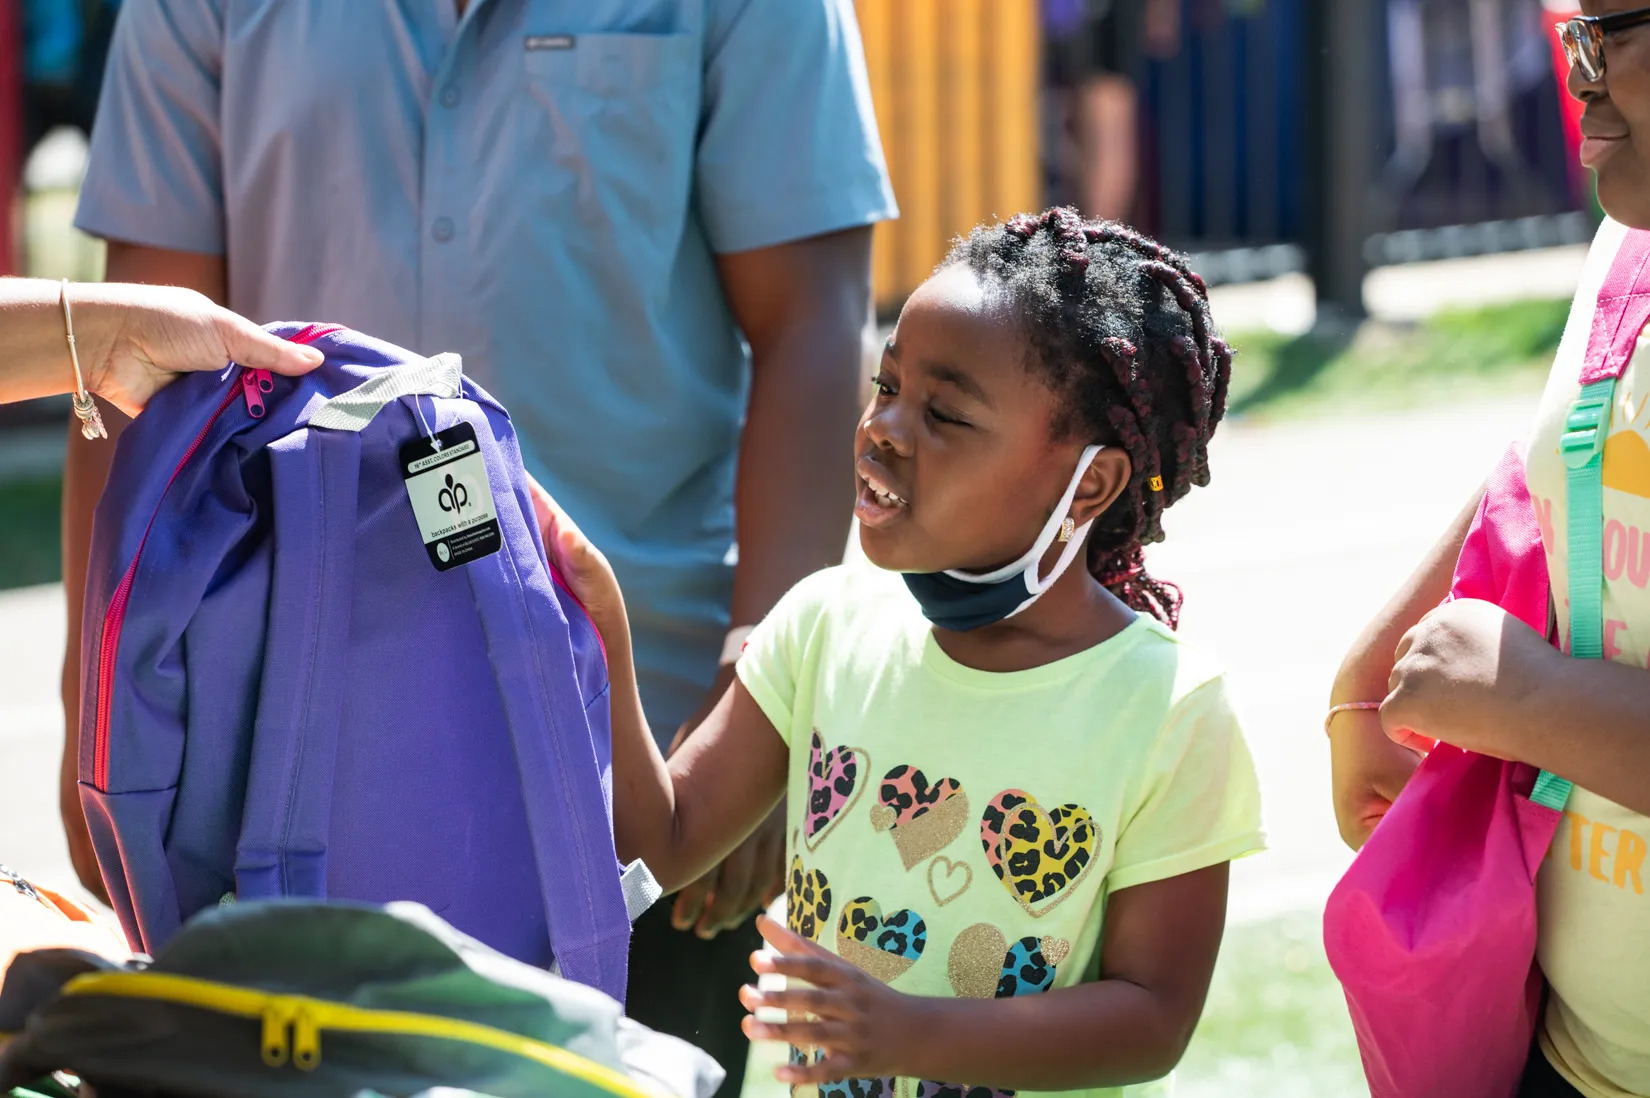 Back-to-school event gives students free haircuts and backpacks